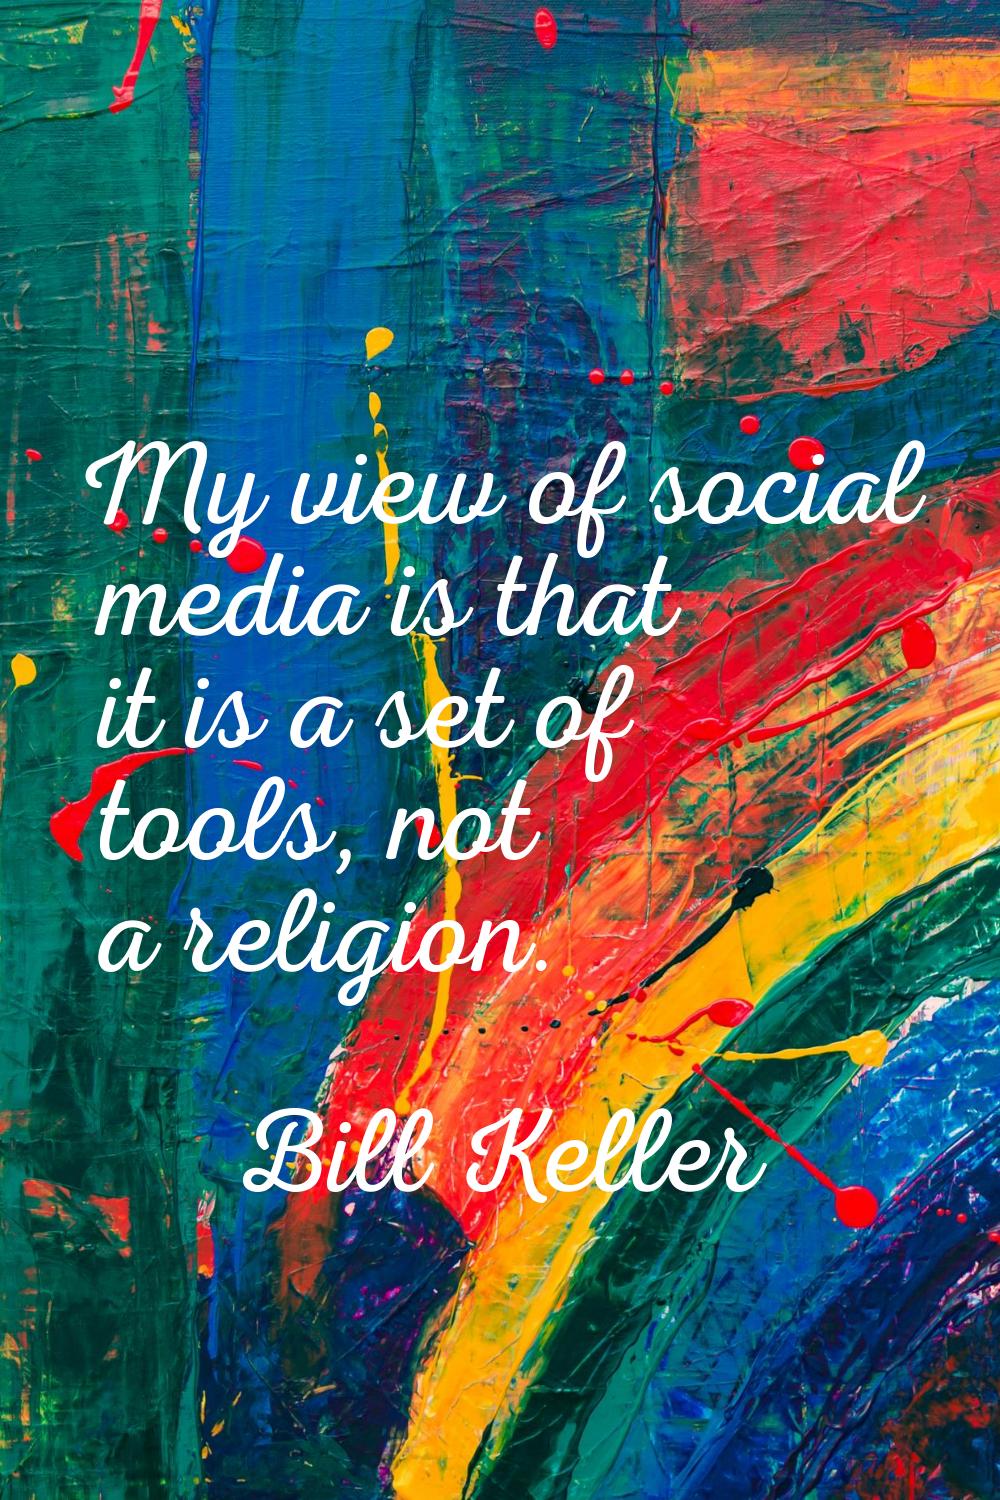 My view of social media is that it is a set of tools, not a religion.